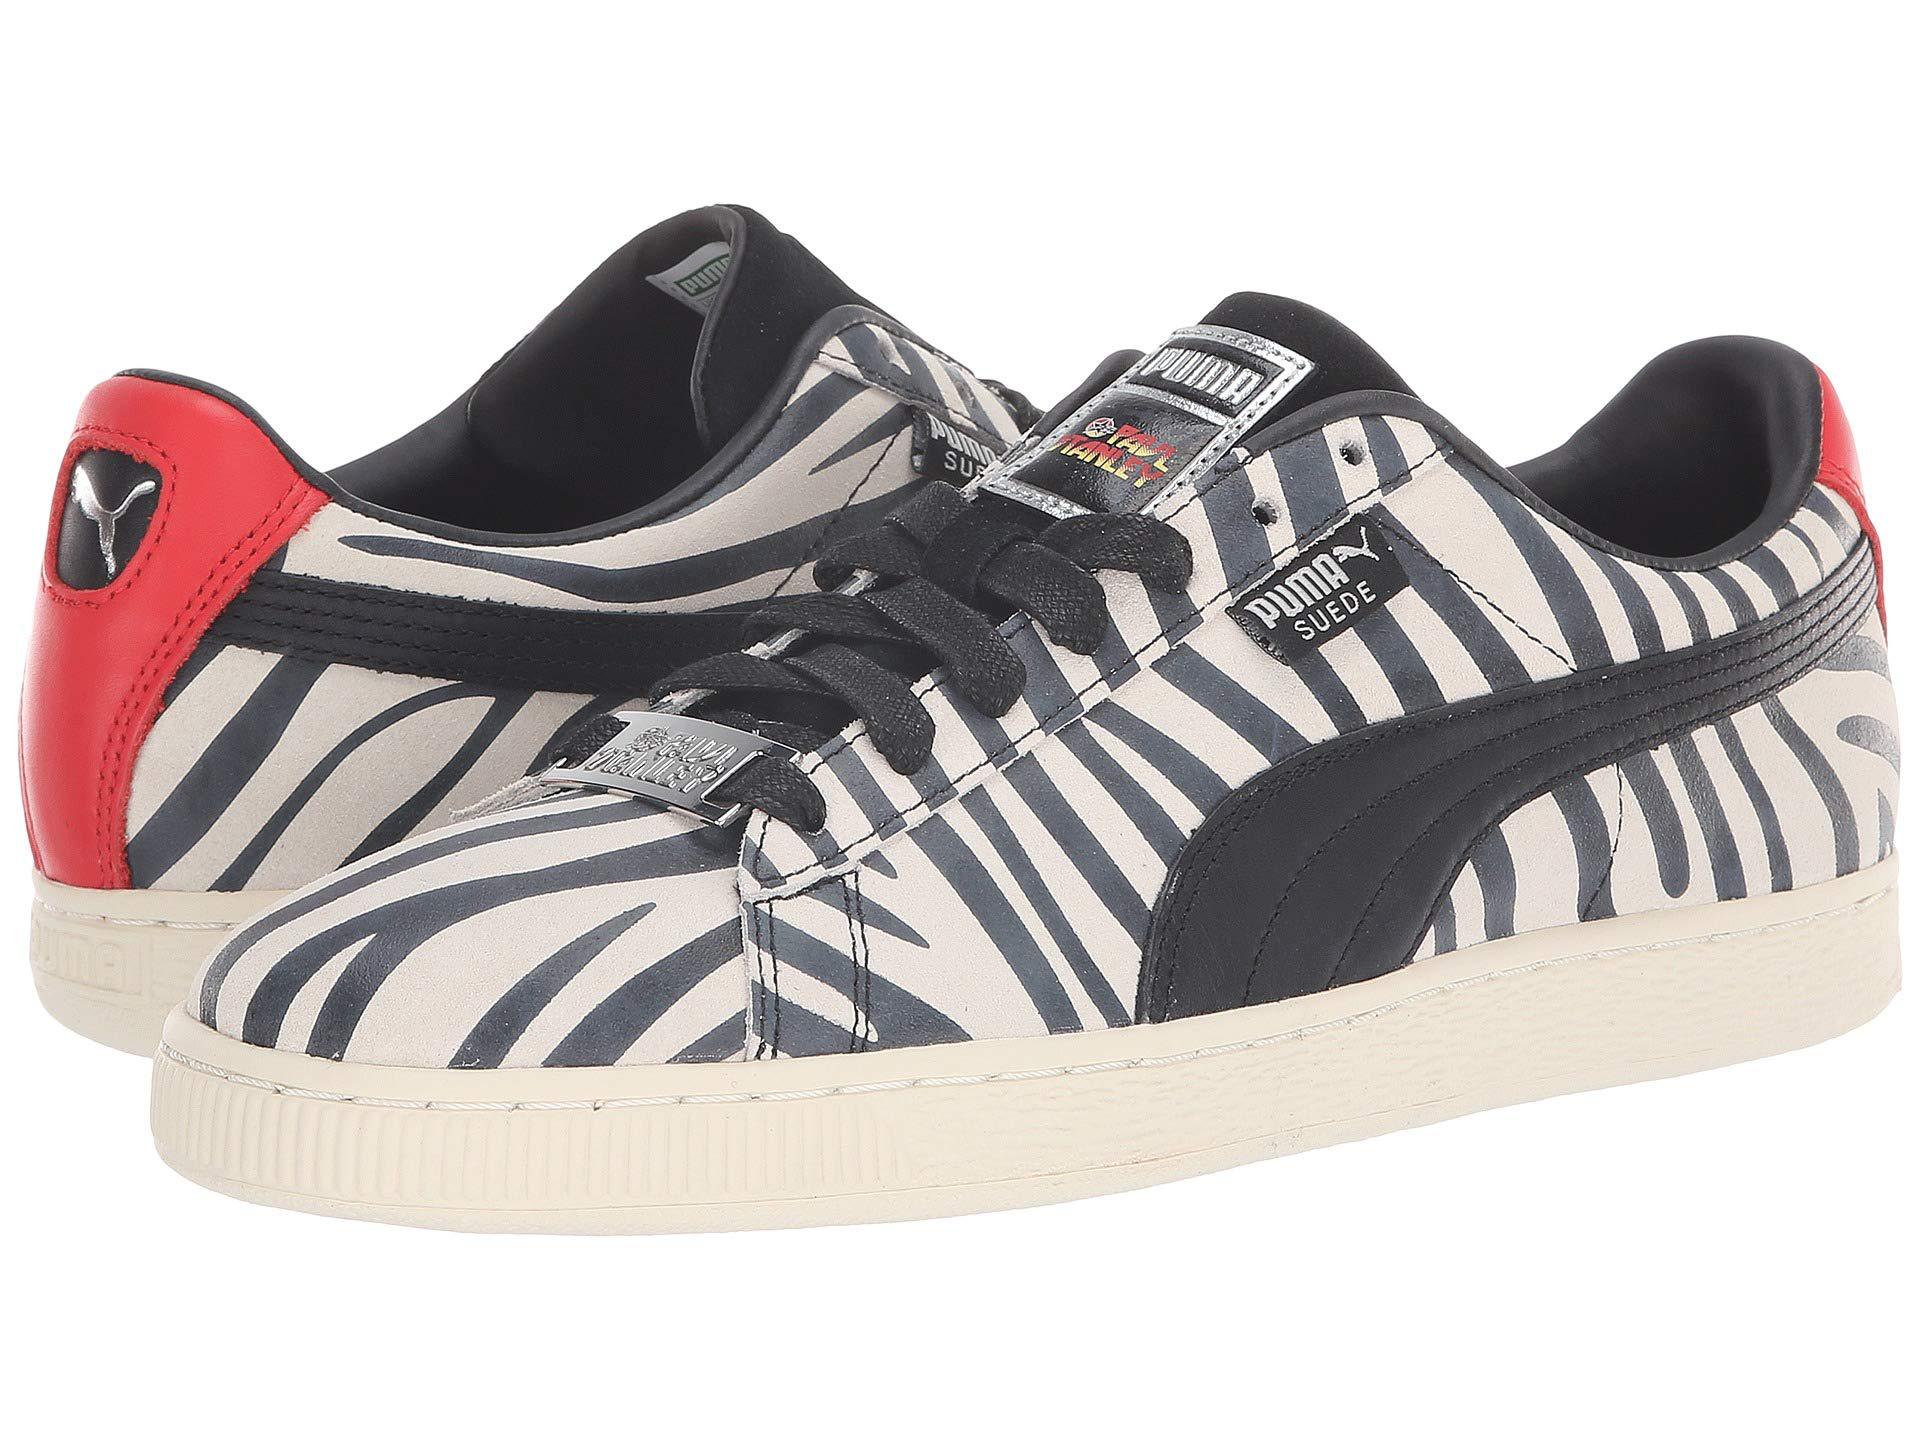 PUMA X Paul Stanley Suede Shoes in White/Black (Black) for Men - Lyst